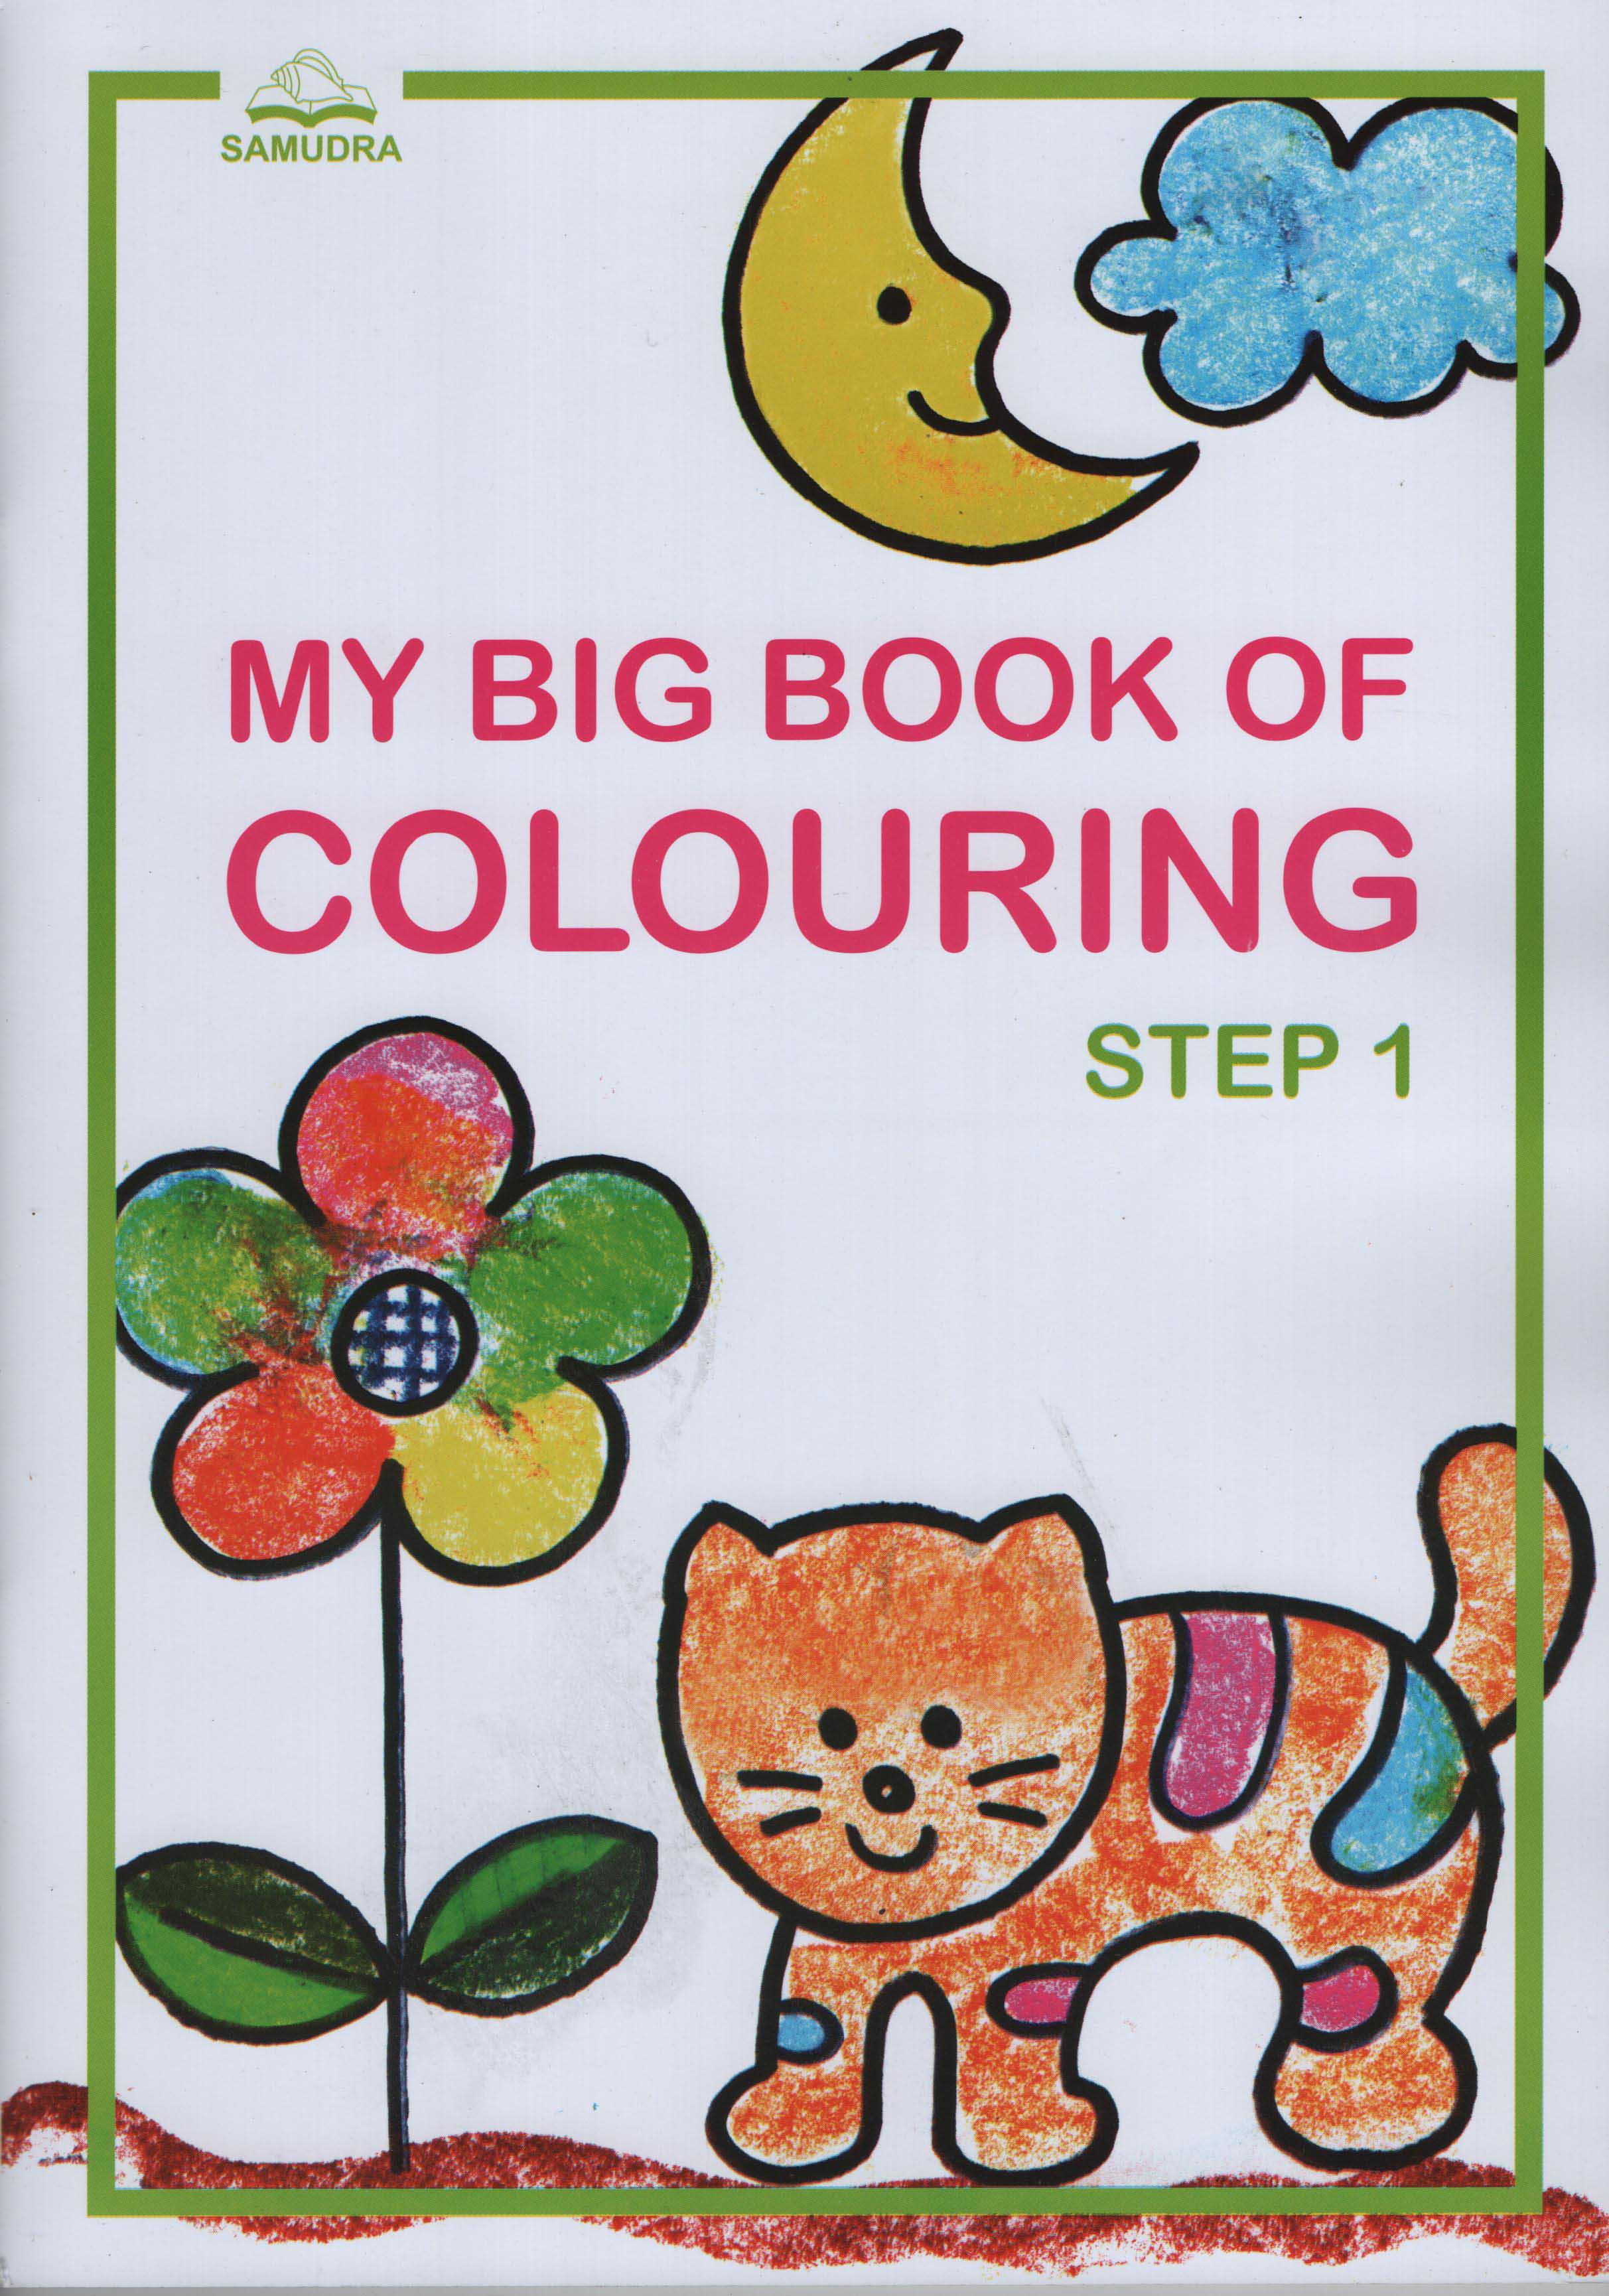 My Big Book of Colouring Step 1